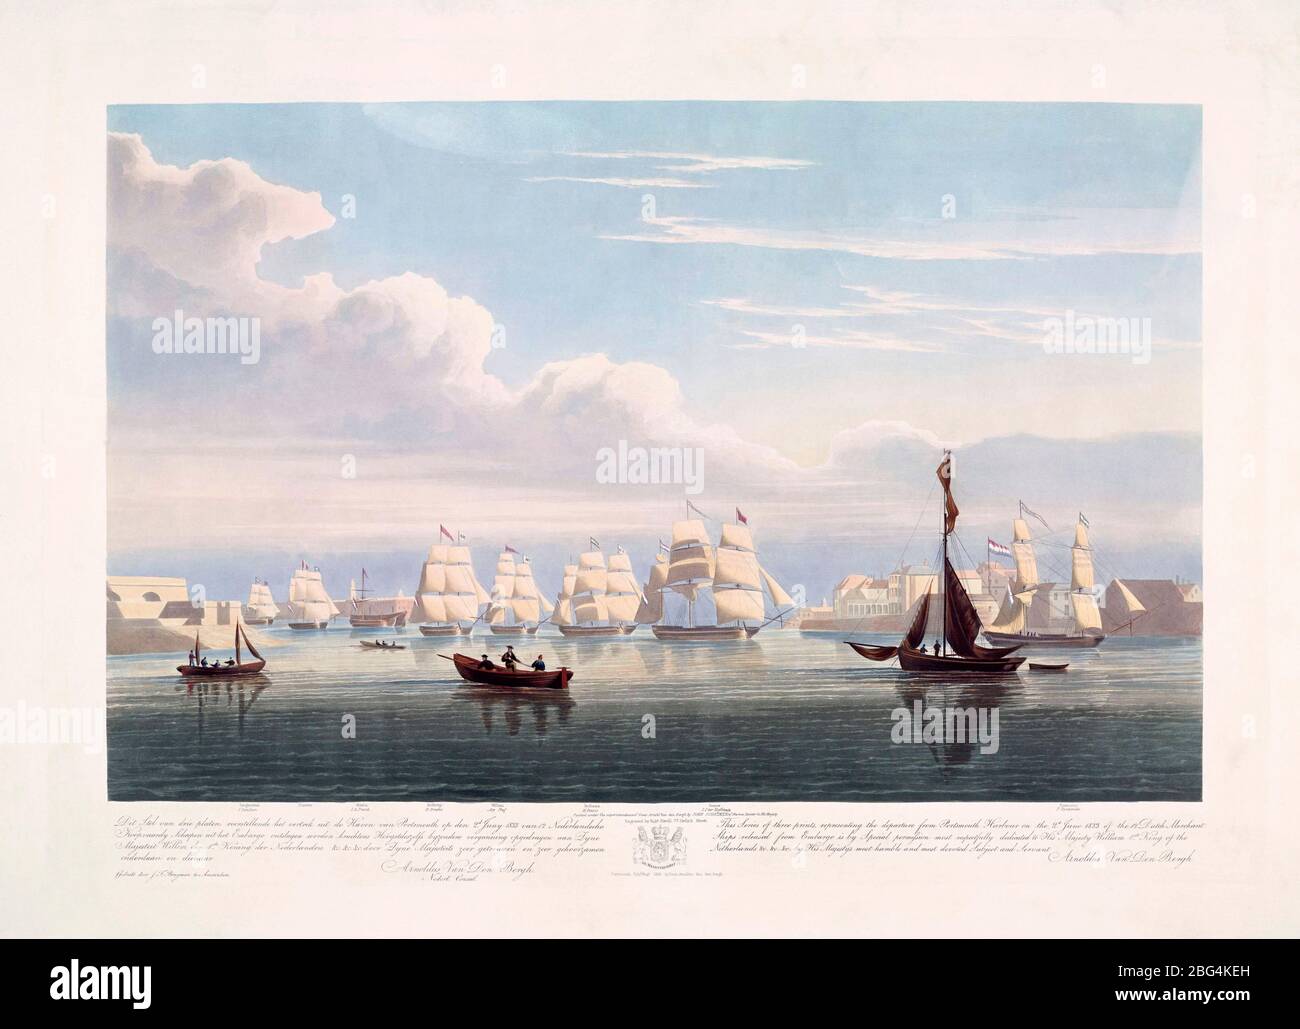 Dutch merchant ships leaving Portsmouth harbour on June 2, 1833.  From an etching dated 1835 by Robert Havell after John Christian Schetky.  England had embargoed twelve Dutch ships in 1832 to put pressure on William of Orange to support Leopold’s election as first King of the Belgians after the country gained independence from the Netherlands.  This picture is one of a set of three showing the ships leaving England after the lifting of the embargo. Stock Photo